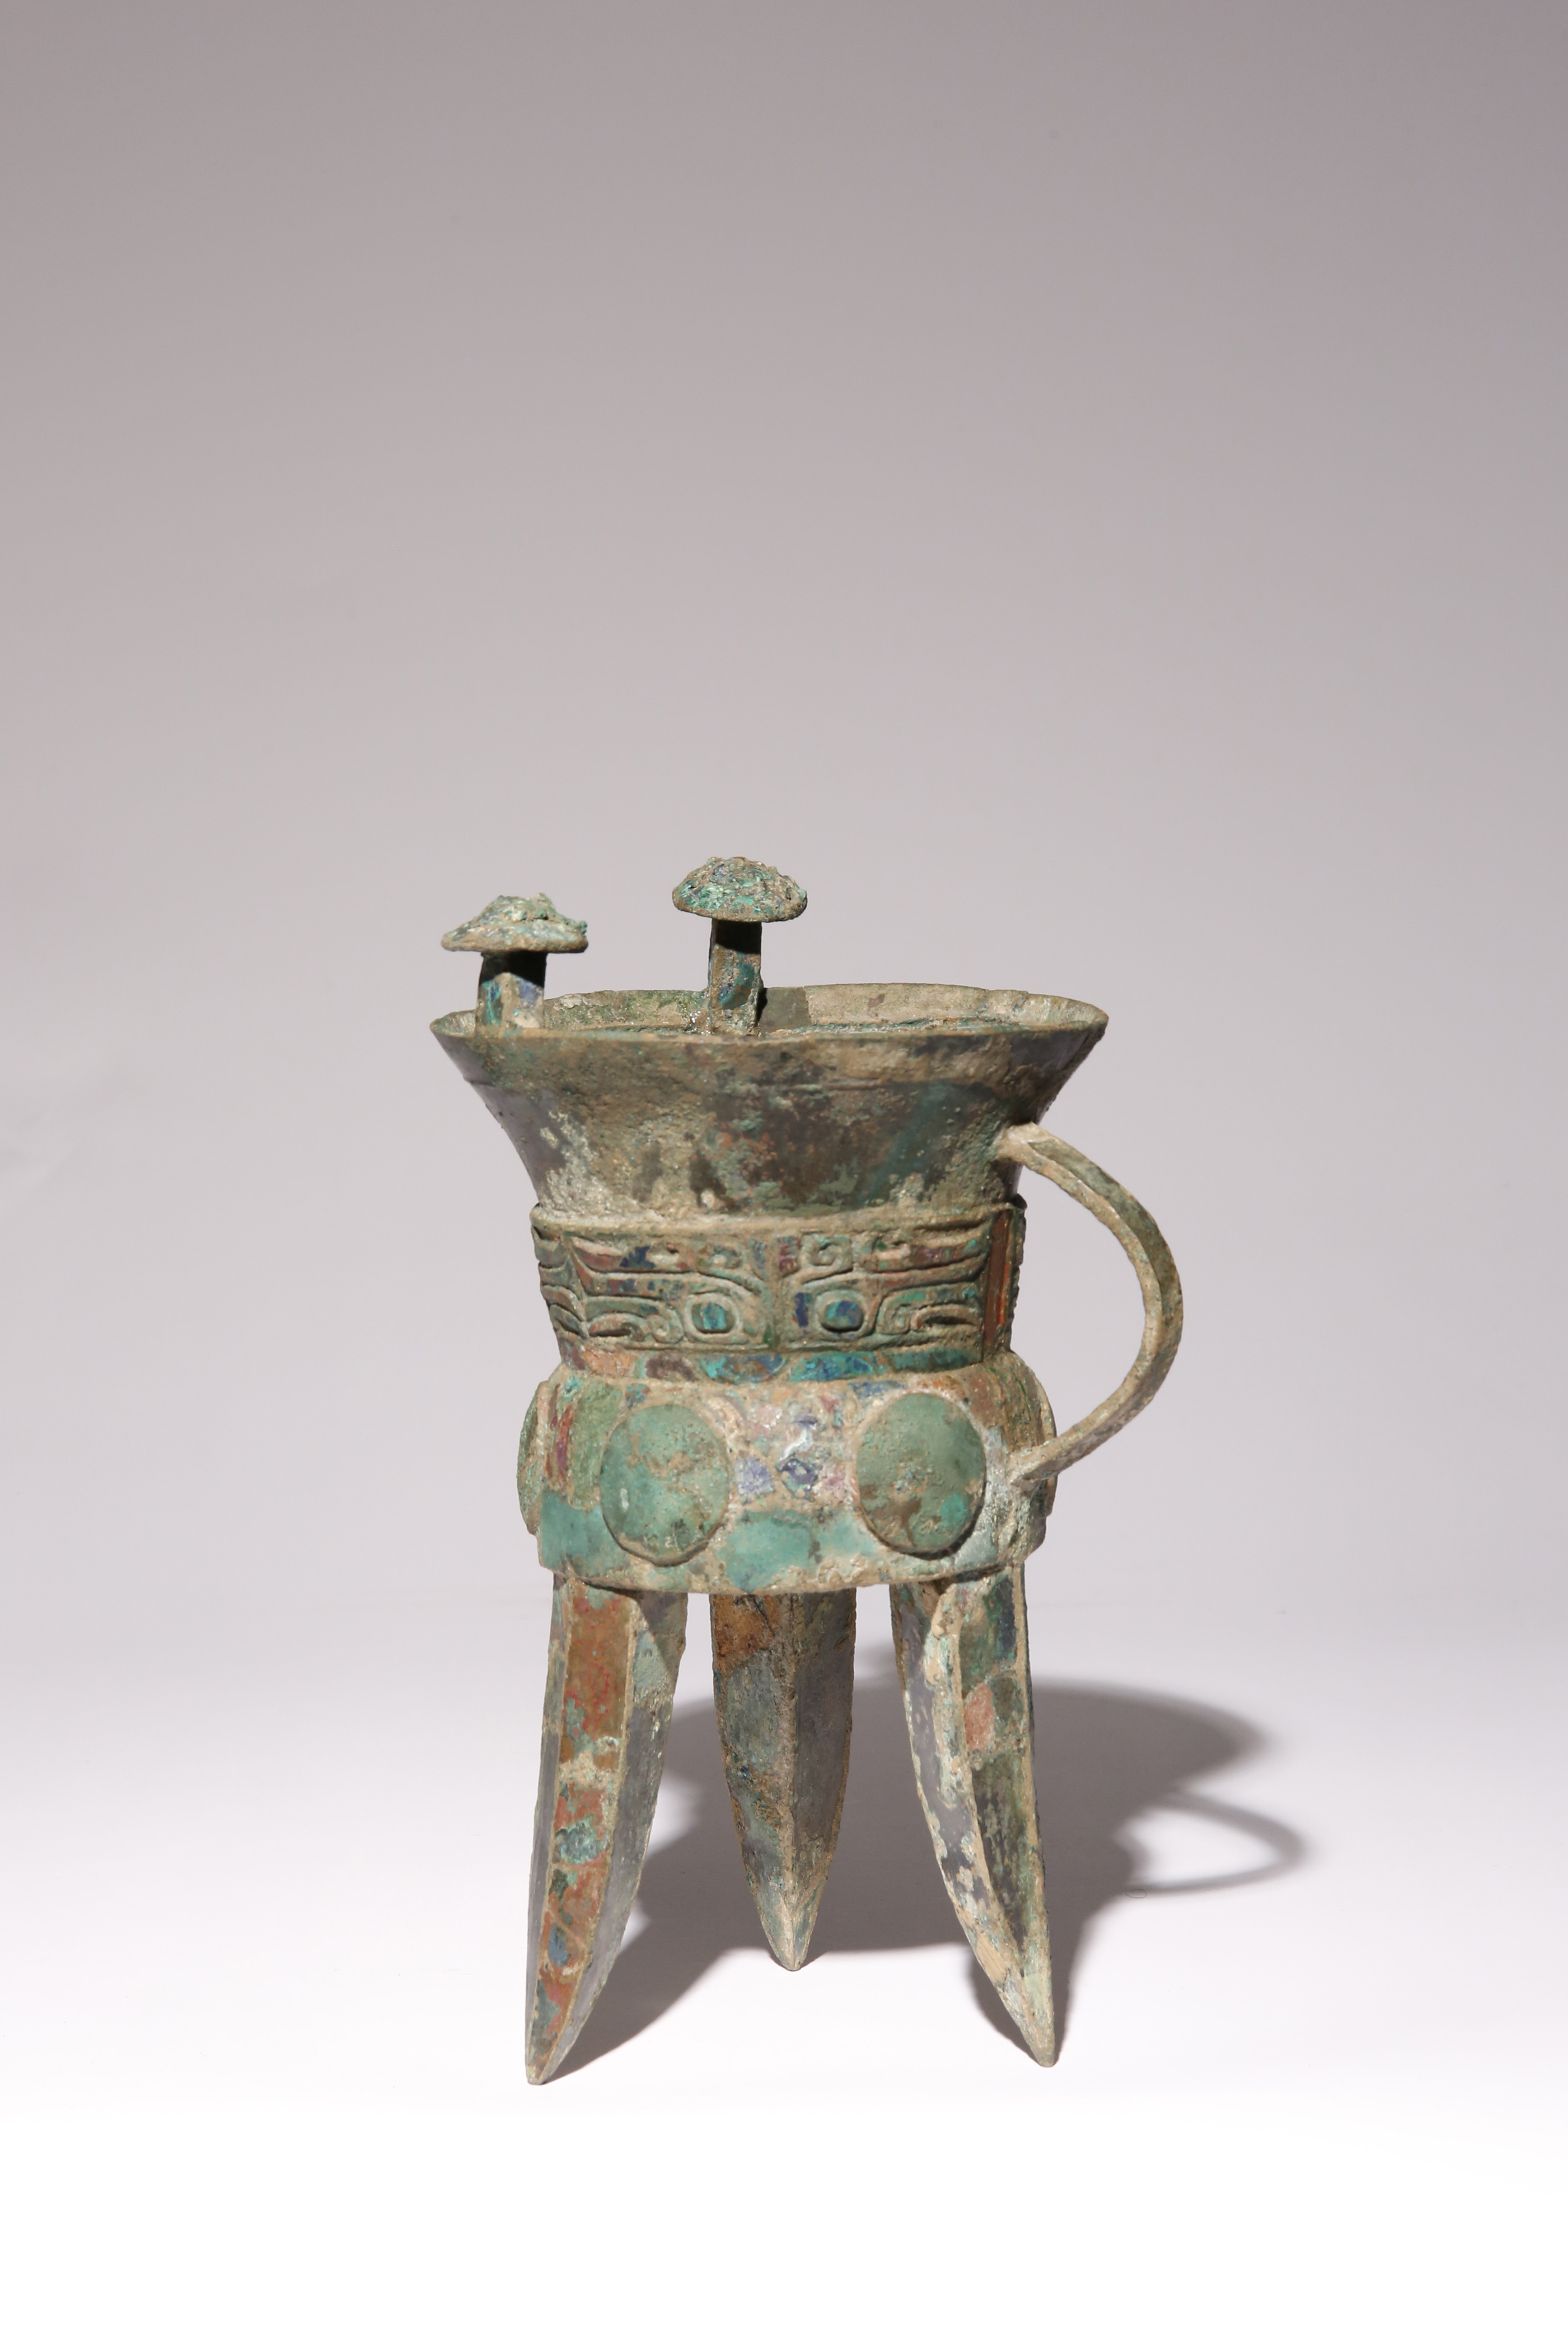 A CHINESE ARCHAISTIC BRONZE TRIPOD WINE VESSEL, JIA SHANG DYNASTY OR LATER Raised on three blade-